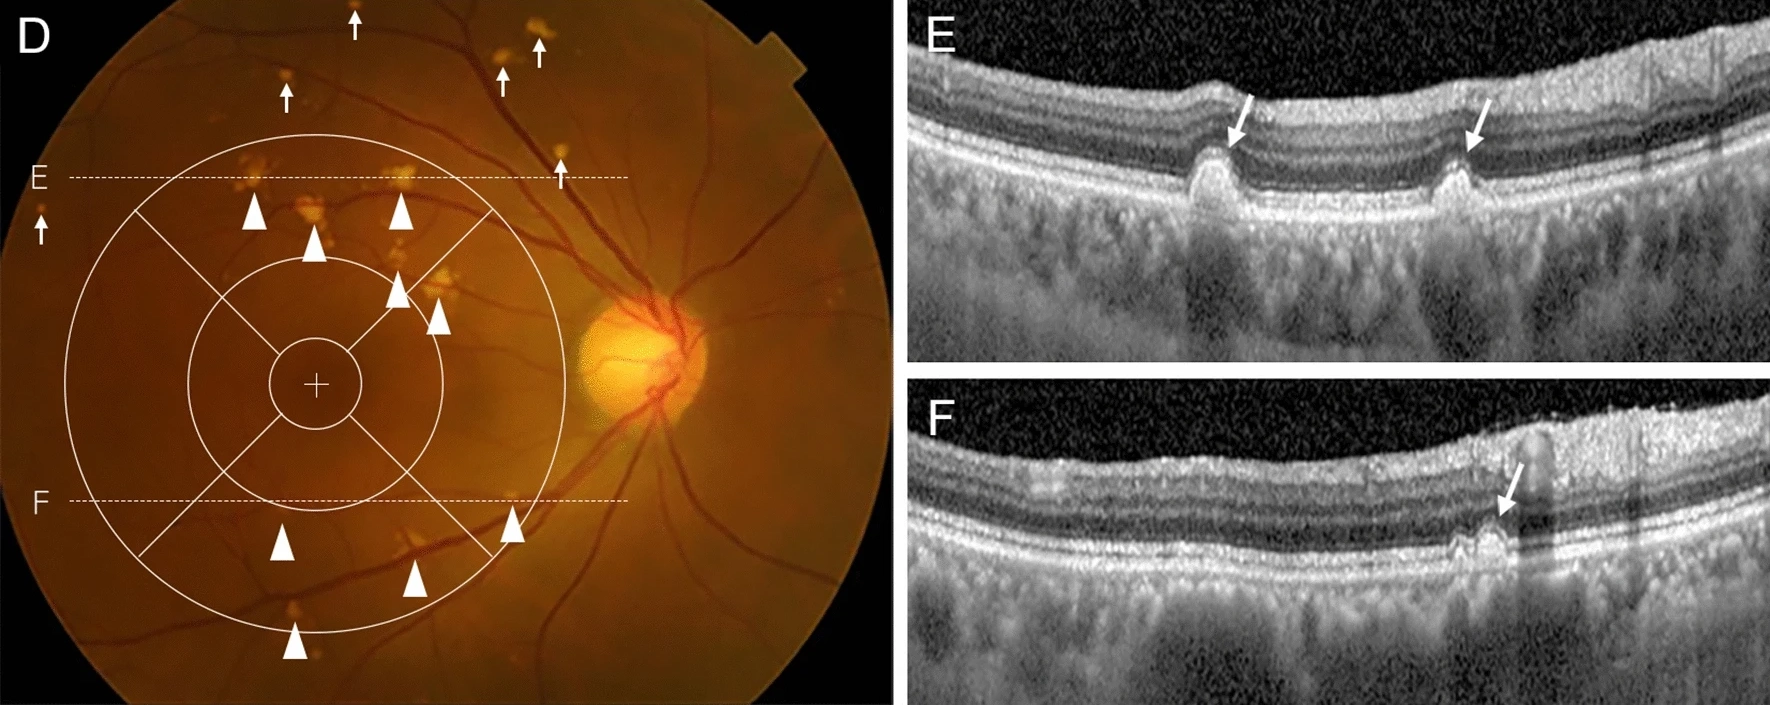 Eyes with pachydrusen had a risk profile for progression to advanced AMD that differed from that of AMD eyes without pachydrusen. In these images from the study, the fundus photo (D) shows pachydrusen in the macula (arrowheads) and extramacular areas (arrows) but no MNV or GA present, while two SD-OCT scans show corresponding sub-RPE deposits in scans done at the dashed white lines labeled E and F.